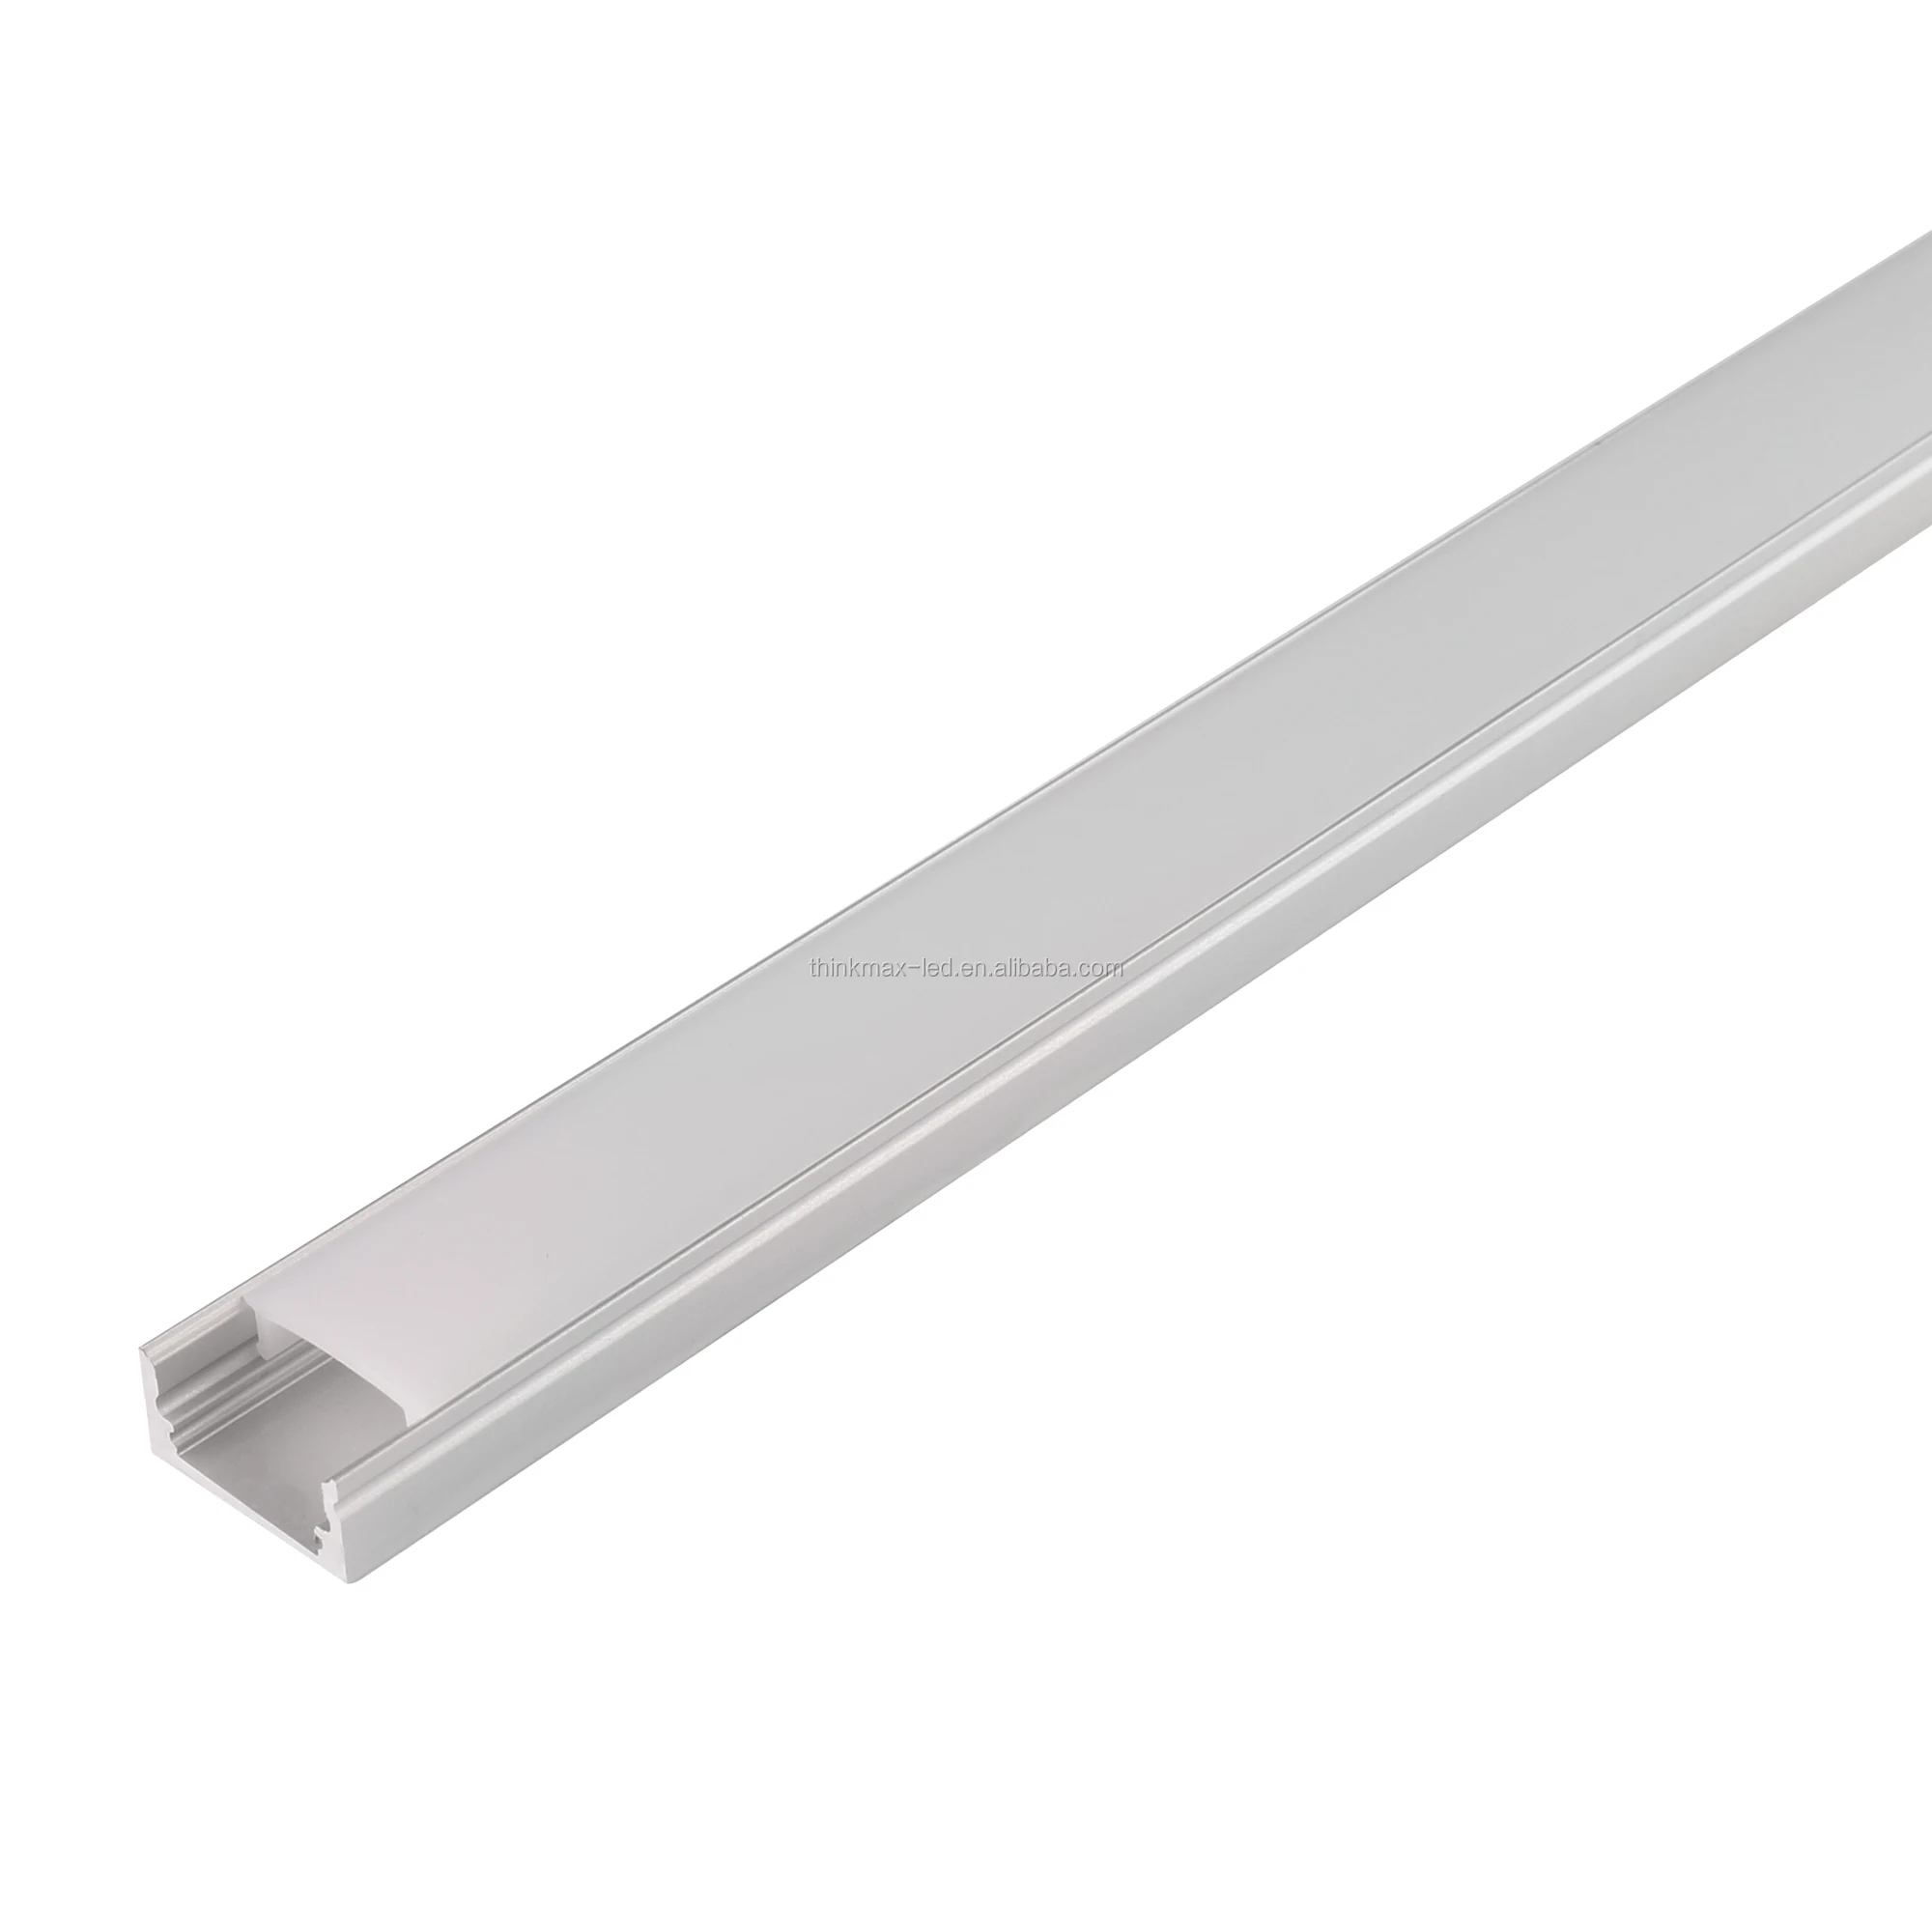 Hot sales and  high quality square shape led aluminum extrusion profile